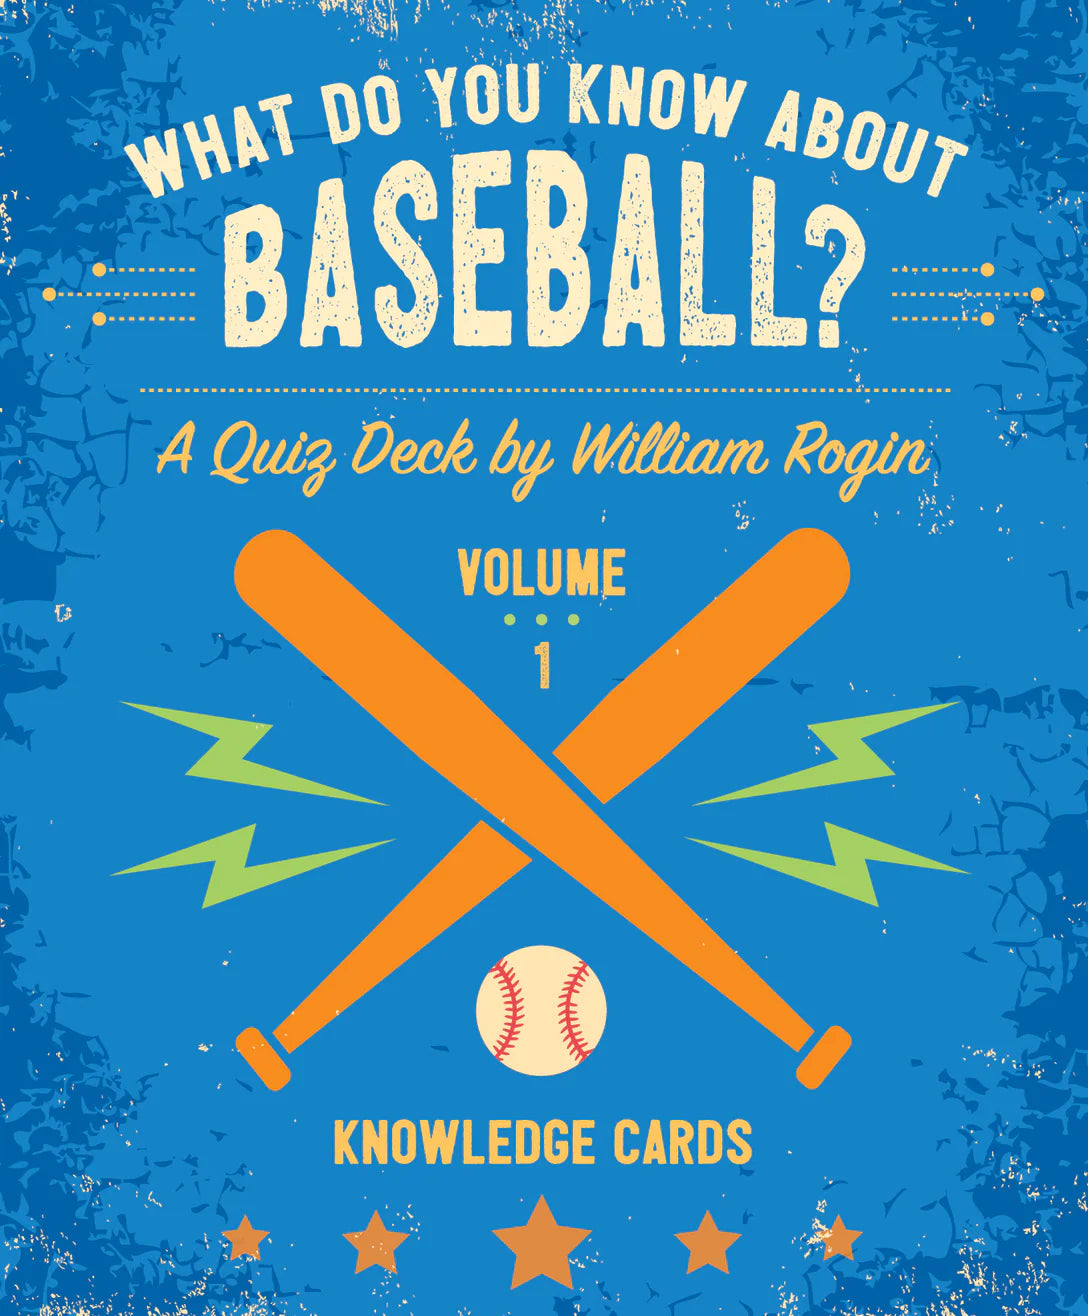 What Do You Know About Baseball? Vol. 1 Knowledge Cards